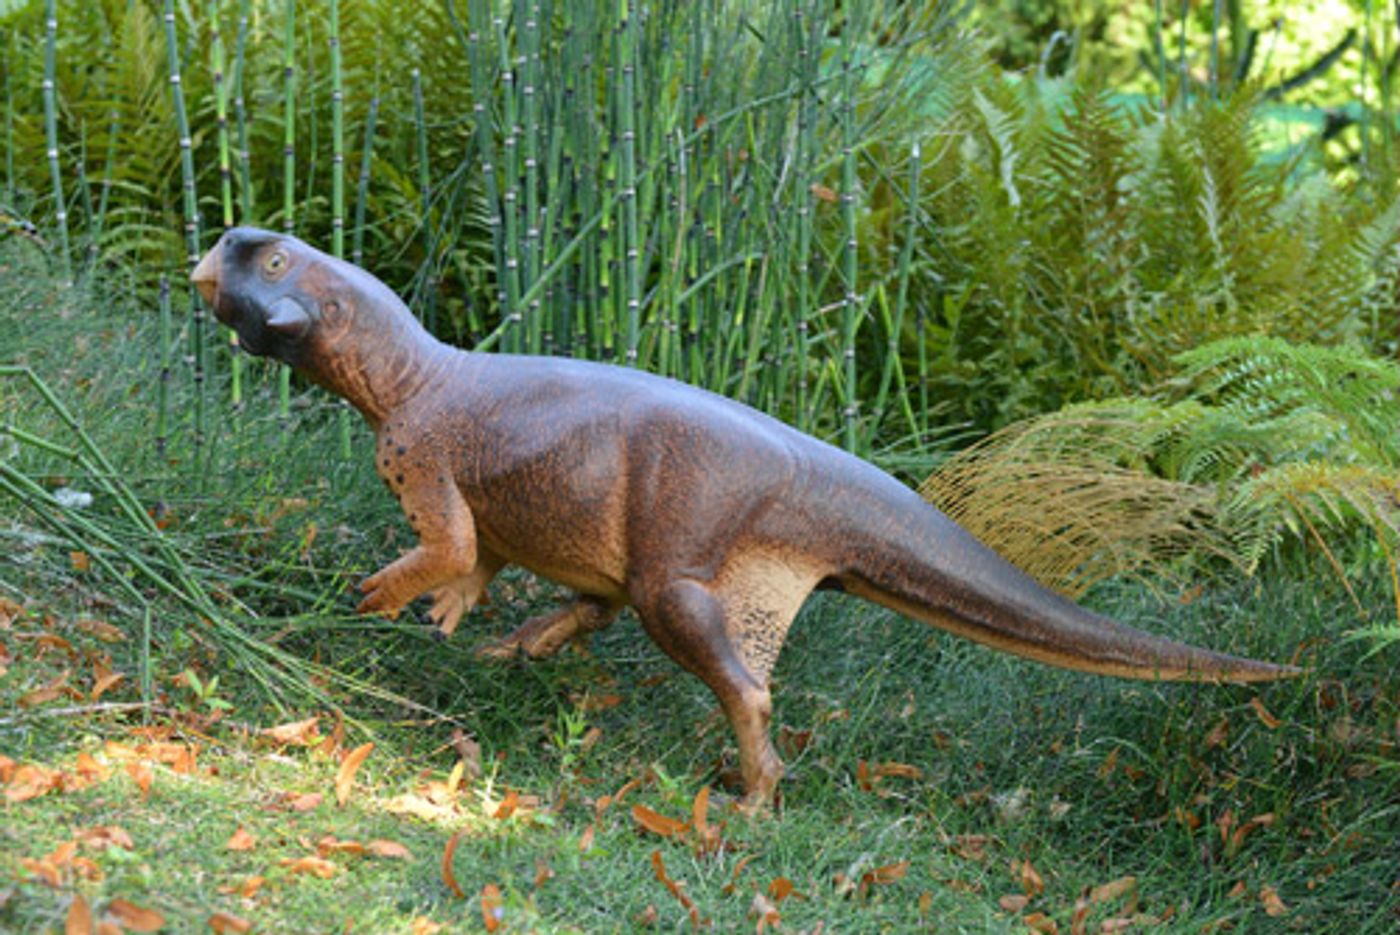 The scale model of the Psittacosaurus stands up for a camouflage test.